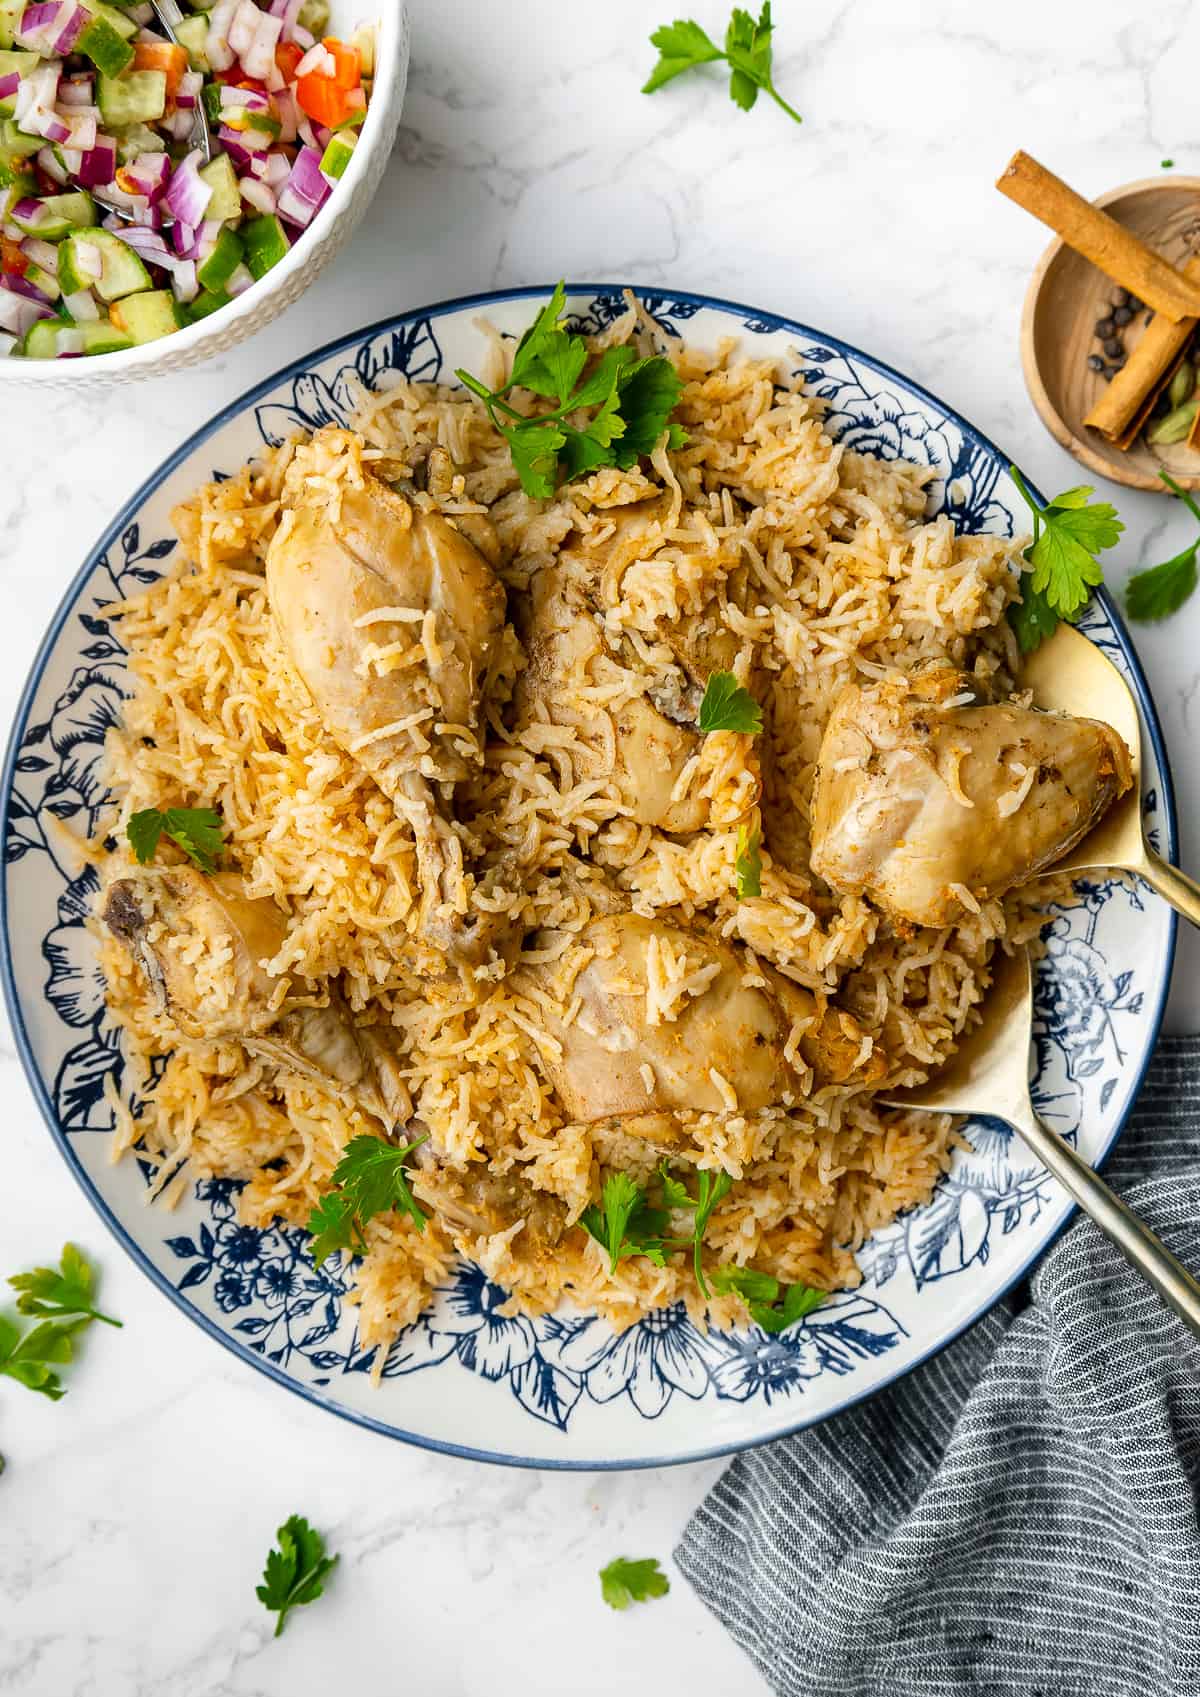 chicken pulao served on a large plate, with kachumber salad on the side.